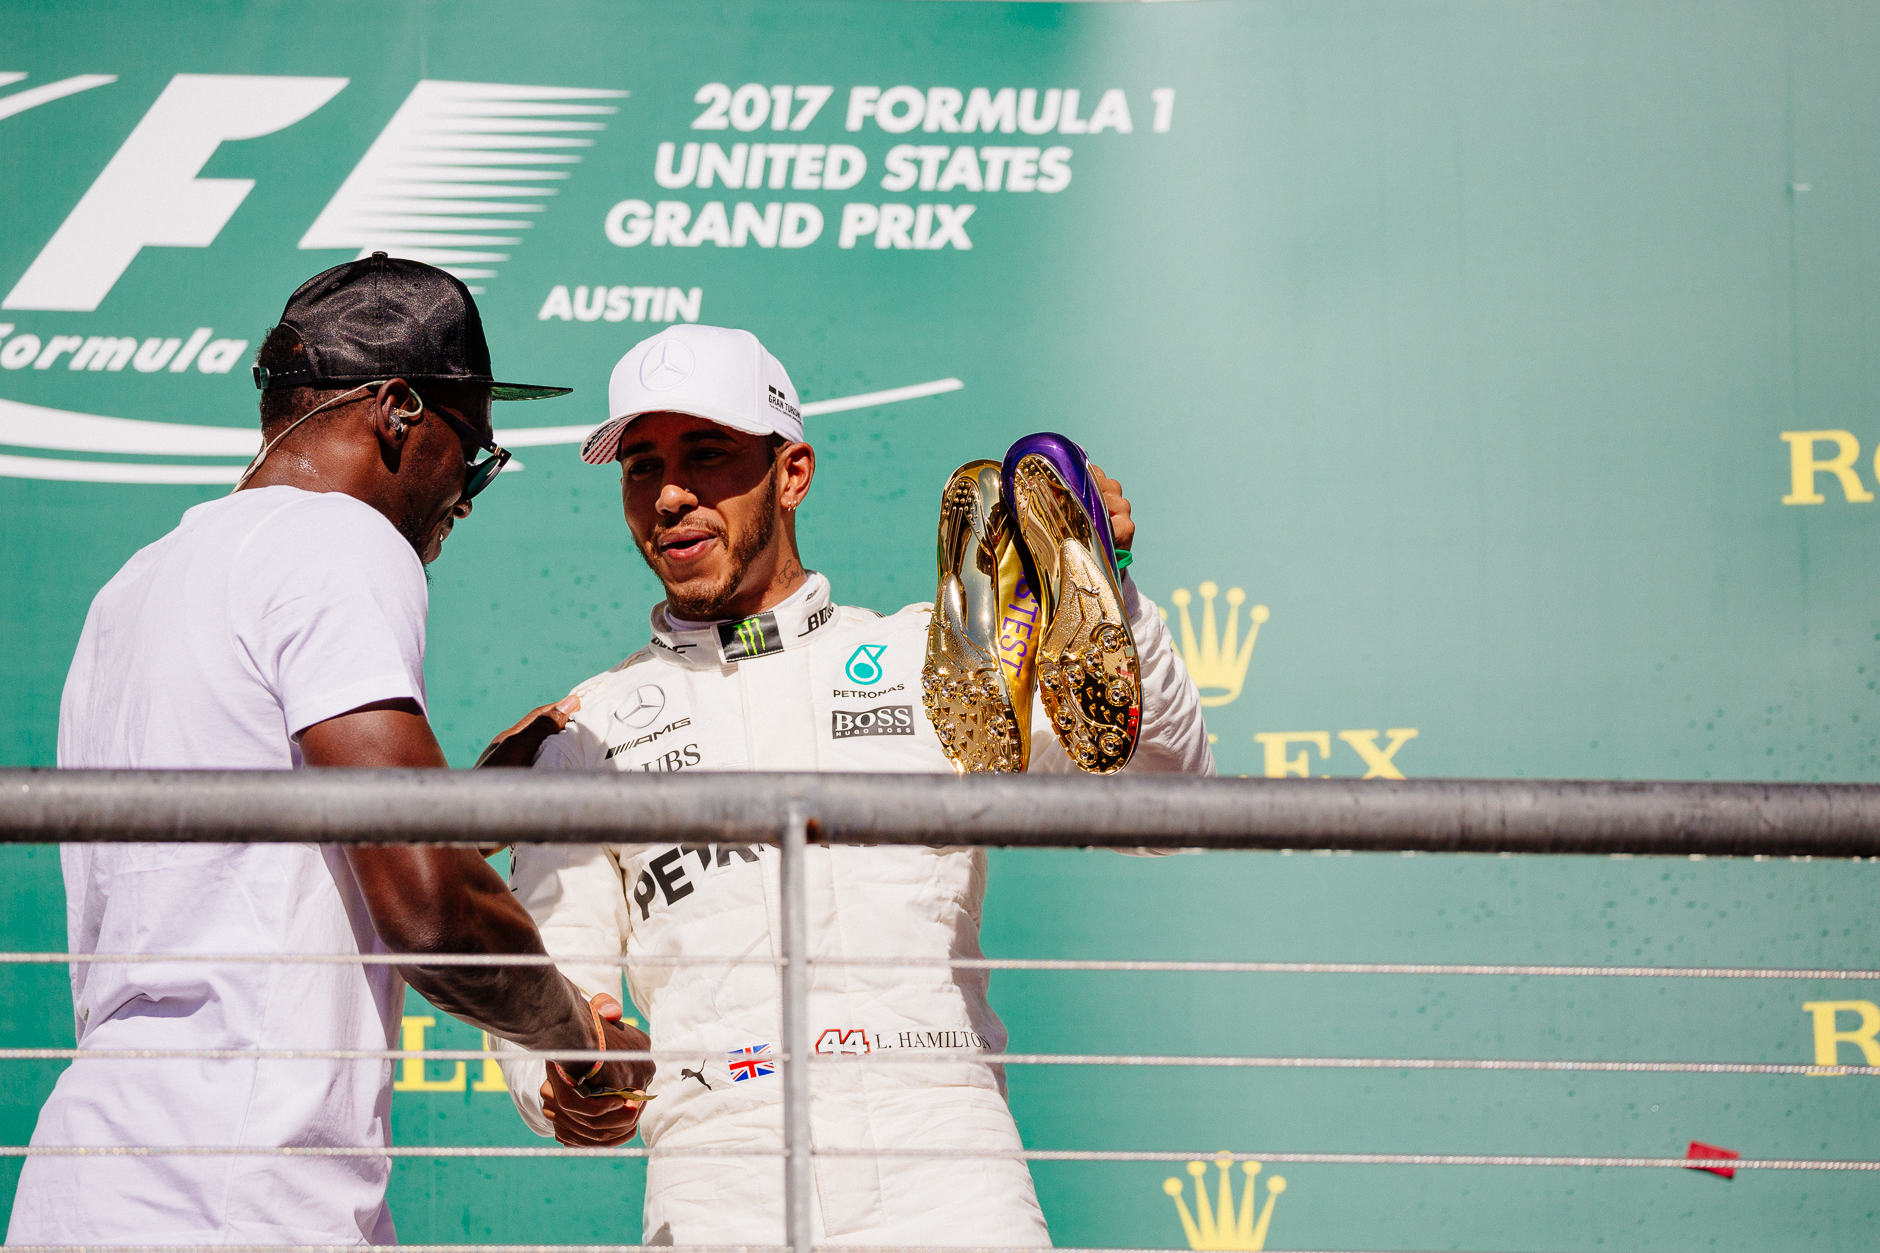 Olympian Usain Bolt of Jamaica served as the honorary starter for the race, and conducted the post-race podium interviews while presenting winner Lewis Hamilton with a pair of golden shoes.